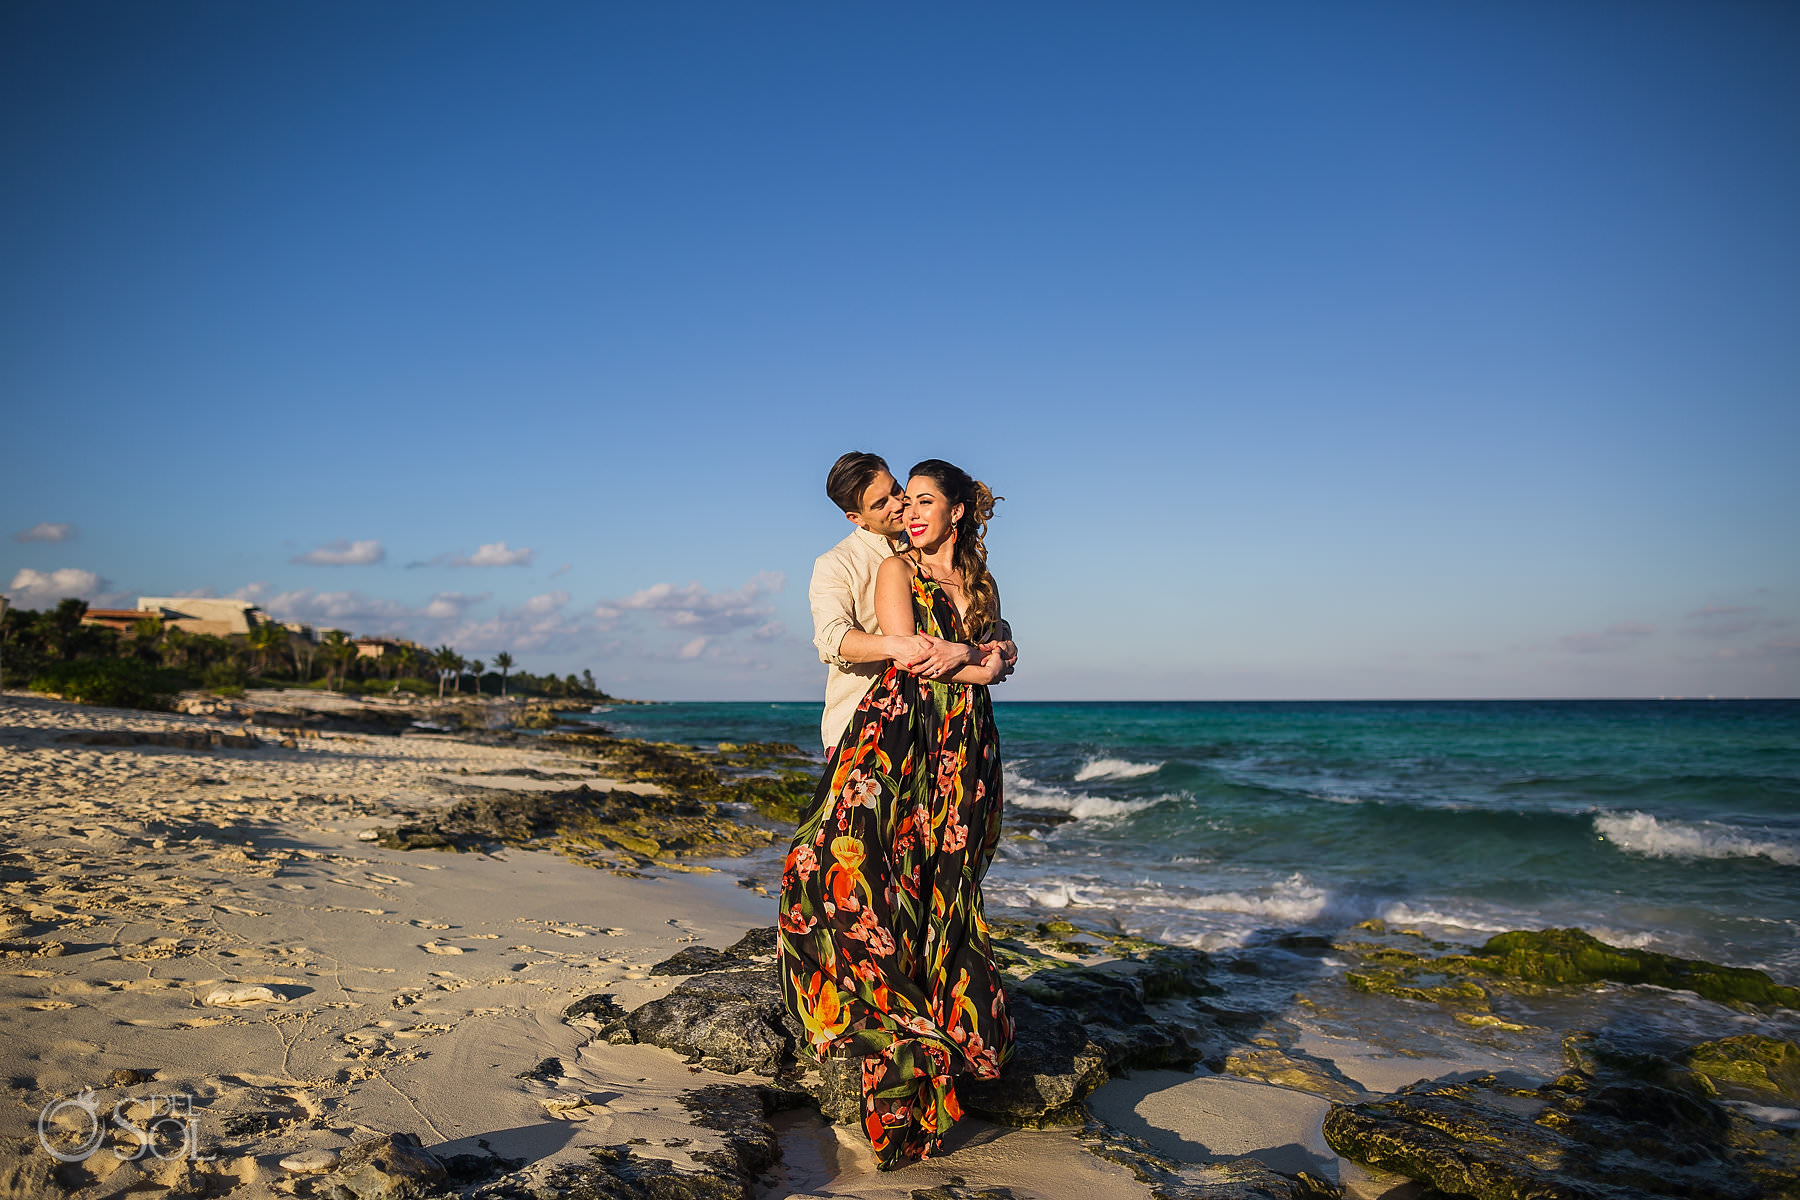 Hotel Xcaret Mexico Beach Portrait Photographer Save the Date Engagement Session